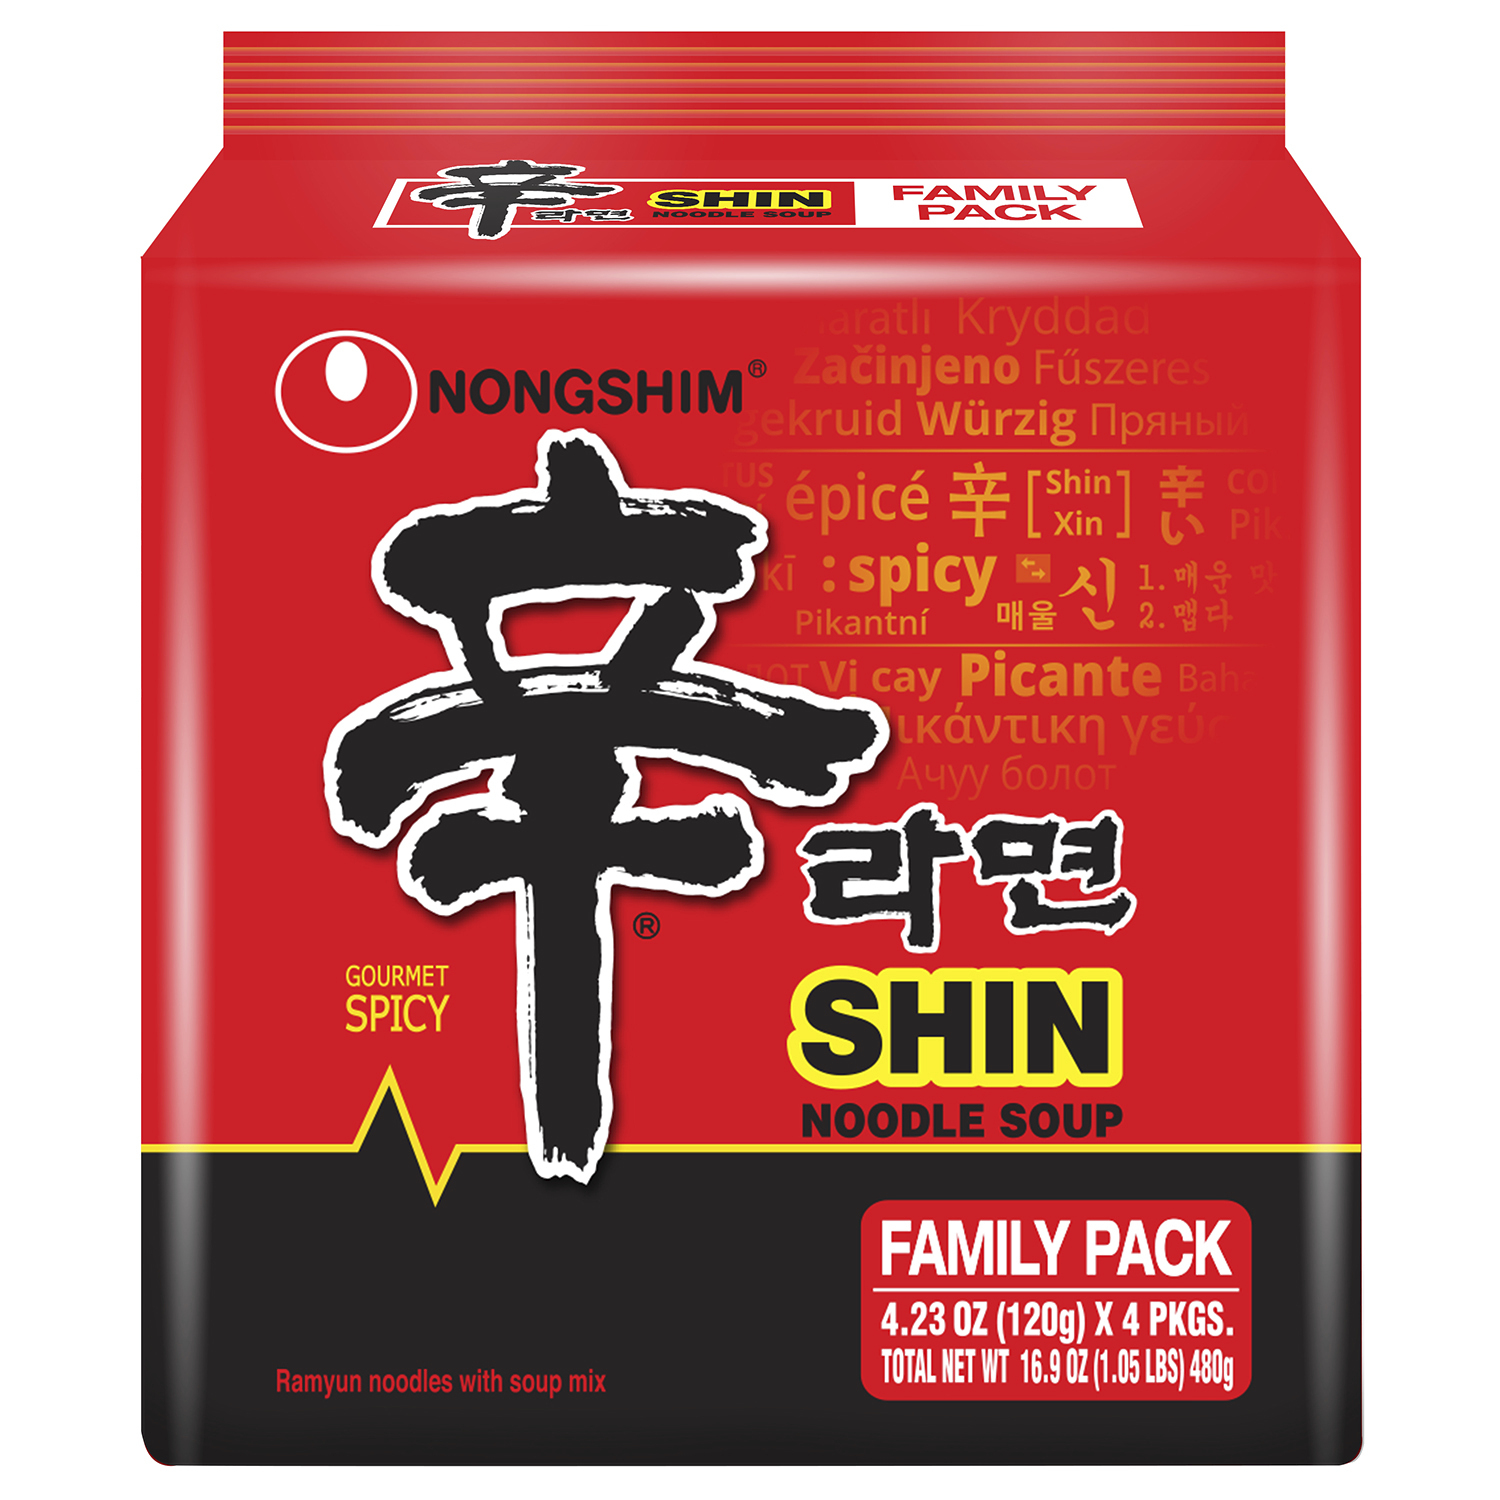 Nongshim Shin Ramyun Spicy Beef Ramen Noodle Soup Pack, 4.2oz X 4 Count - image 1 of 7